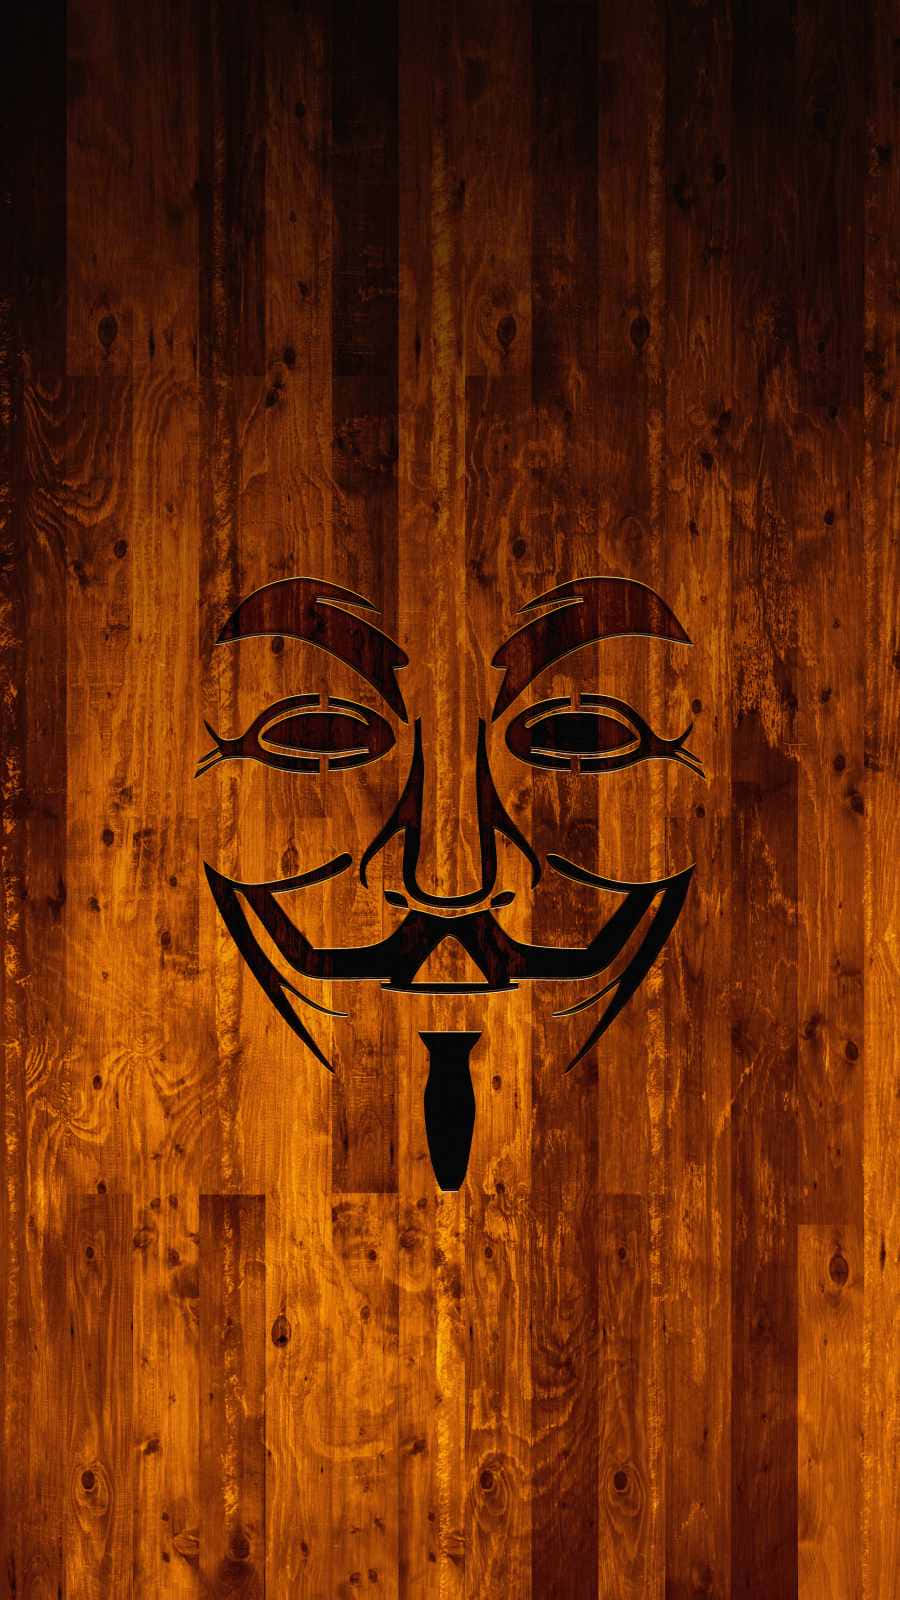 A high tech and encrypted iPhone from the organization Anonymous Wallpaper